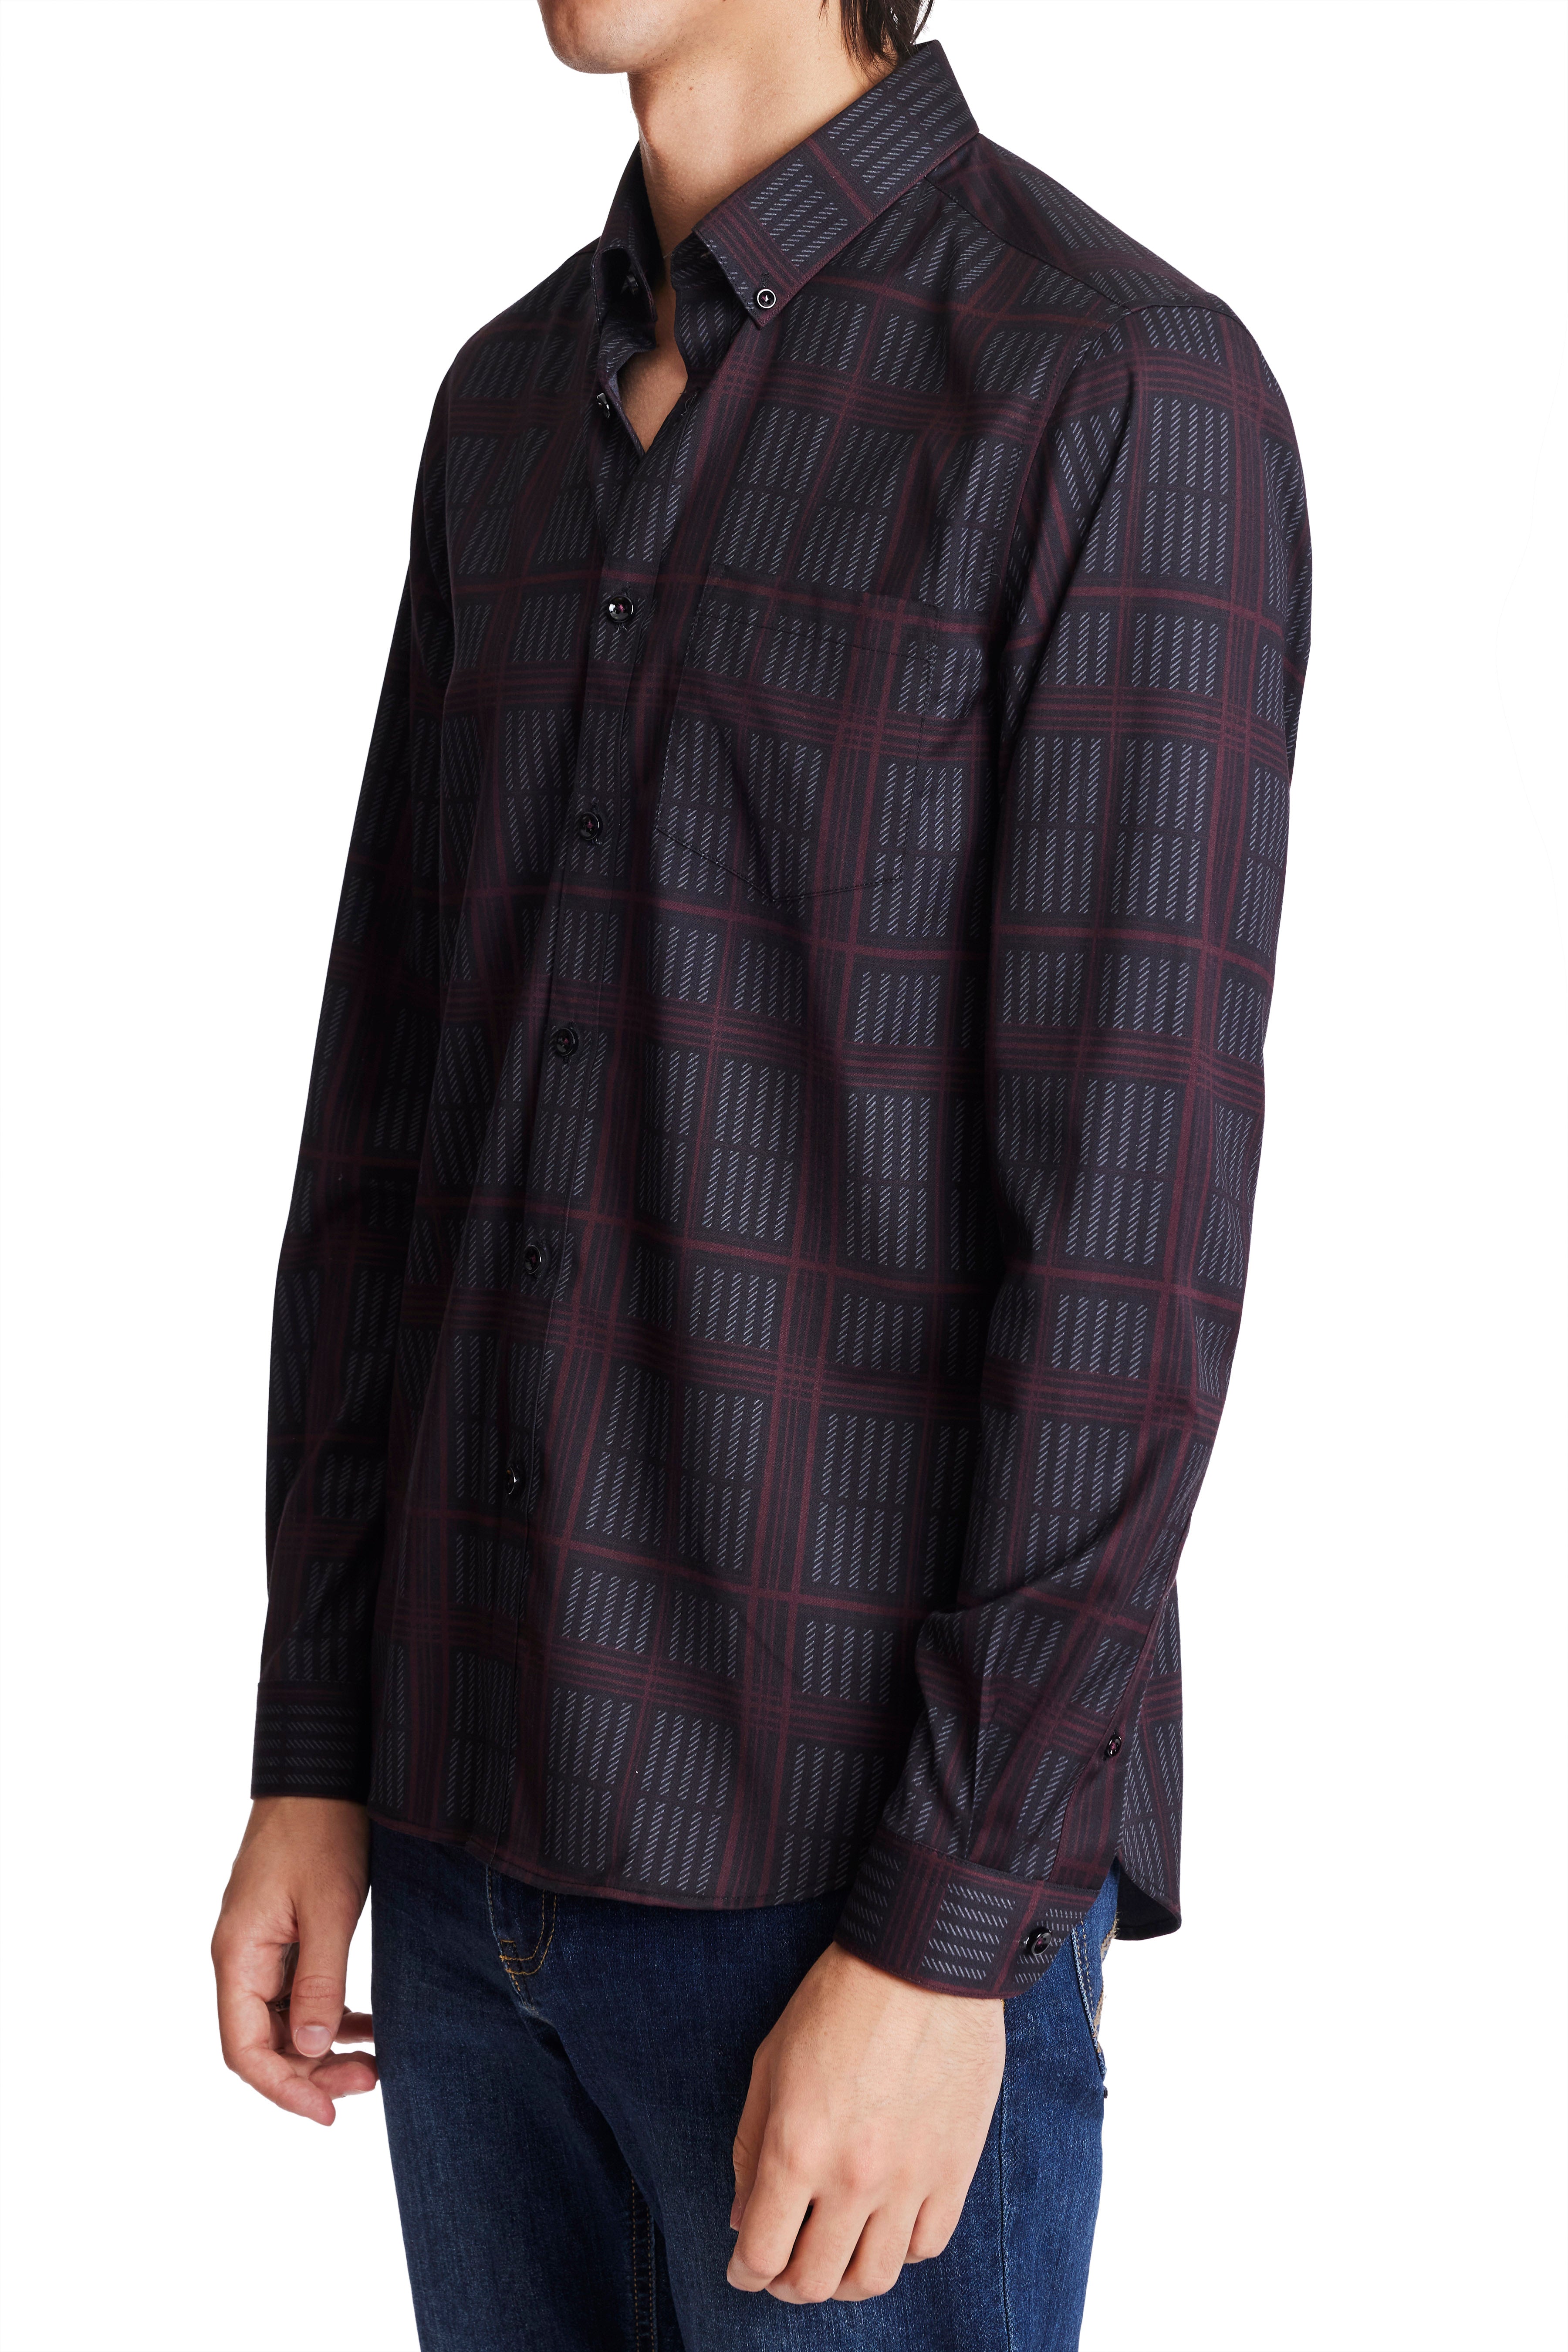 Brian Button Down Shirt - Black and Red